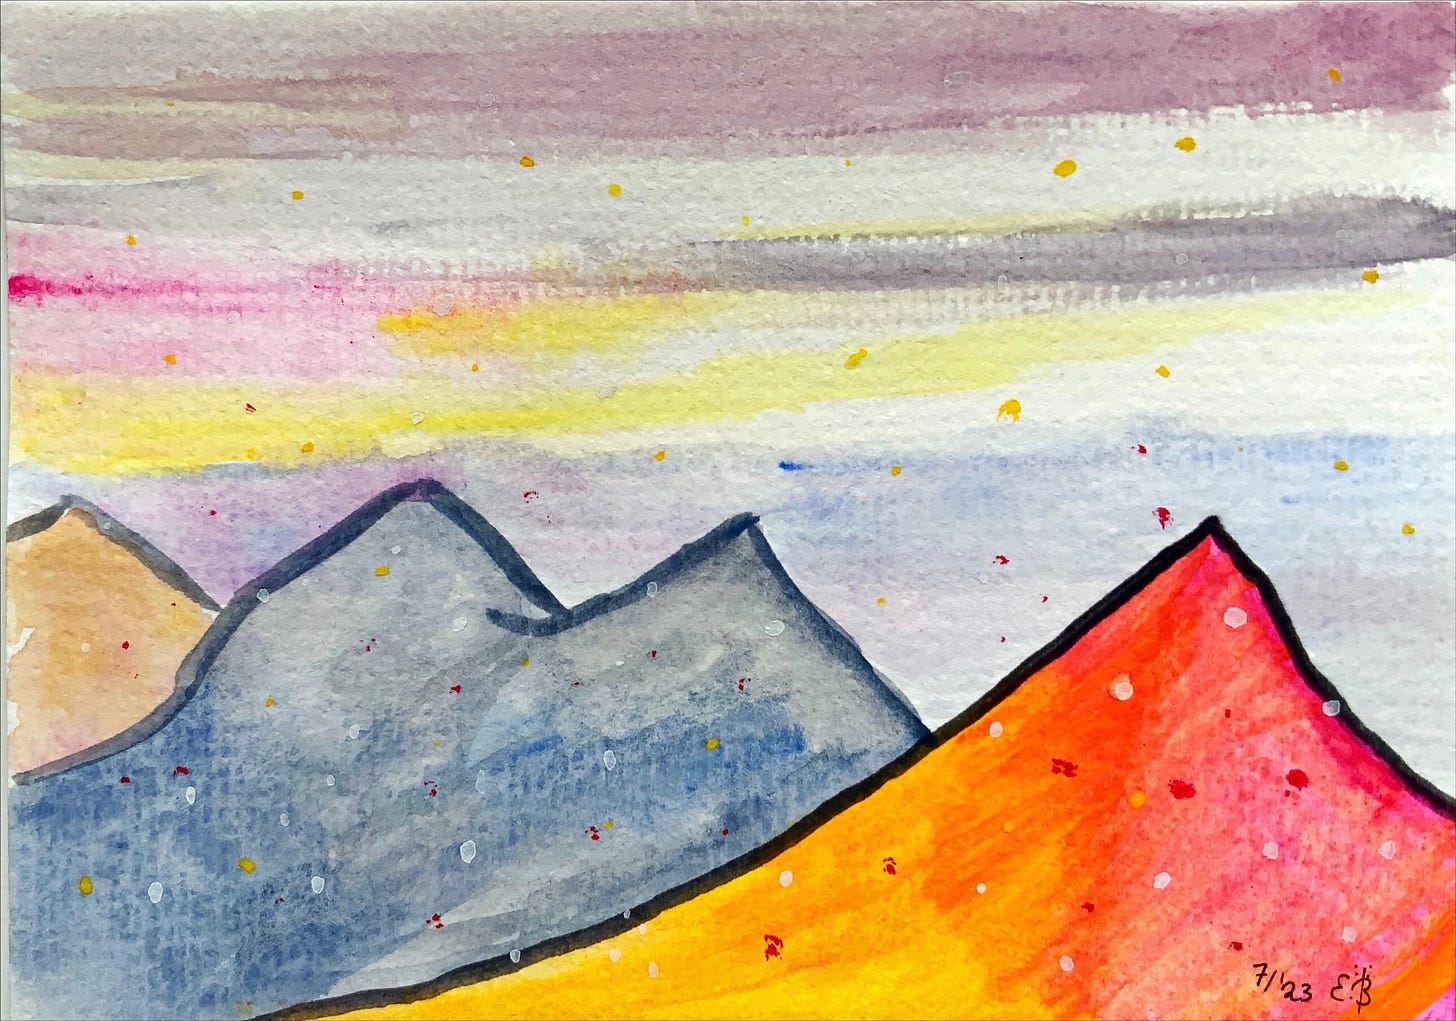 Colourful gouache painting of three mountains in pink, orange, blue. The sky is light blue, yellow, pink. Links to my eBay shop.